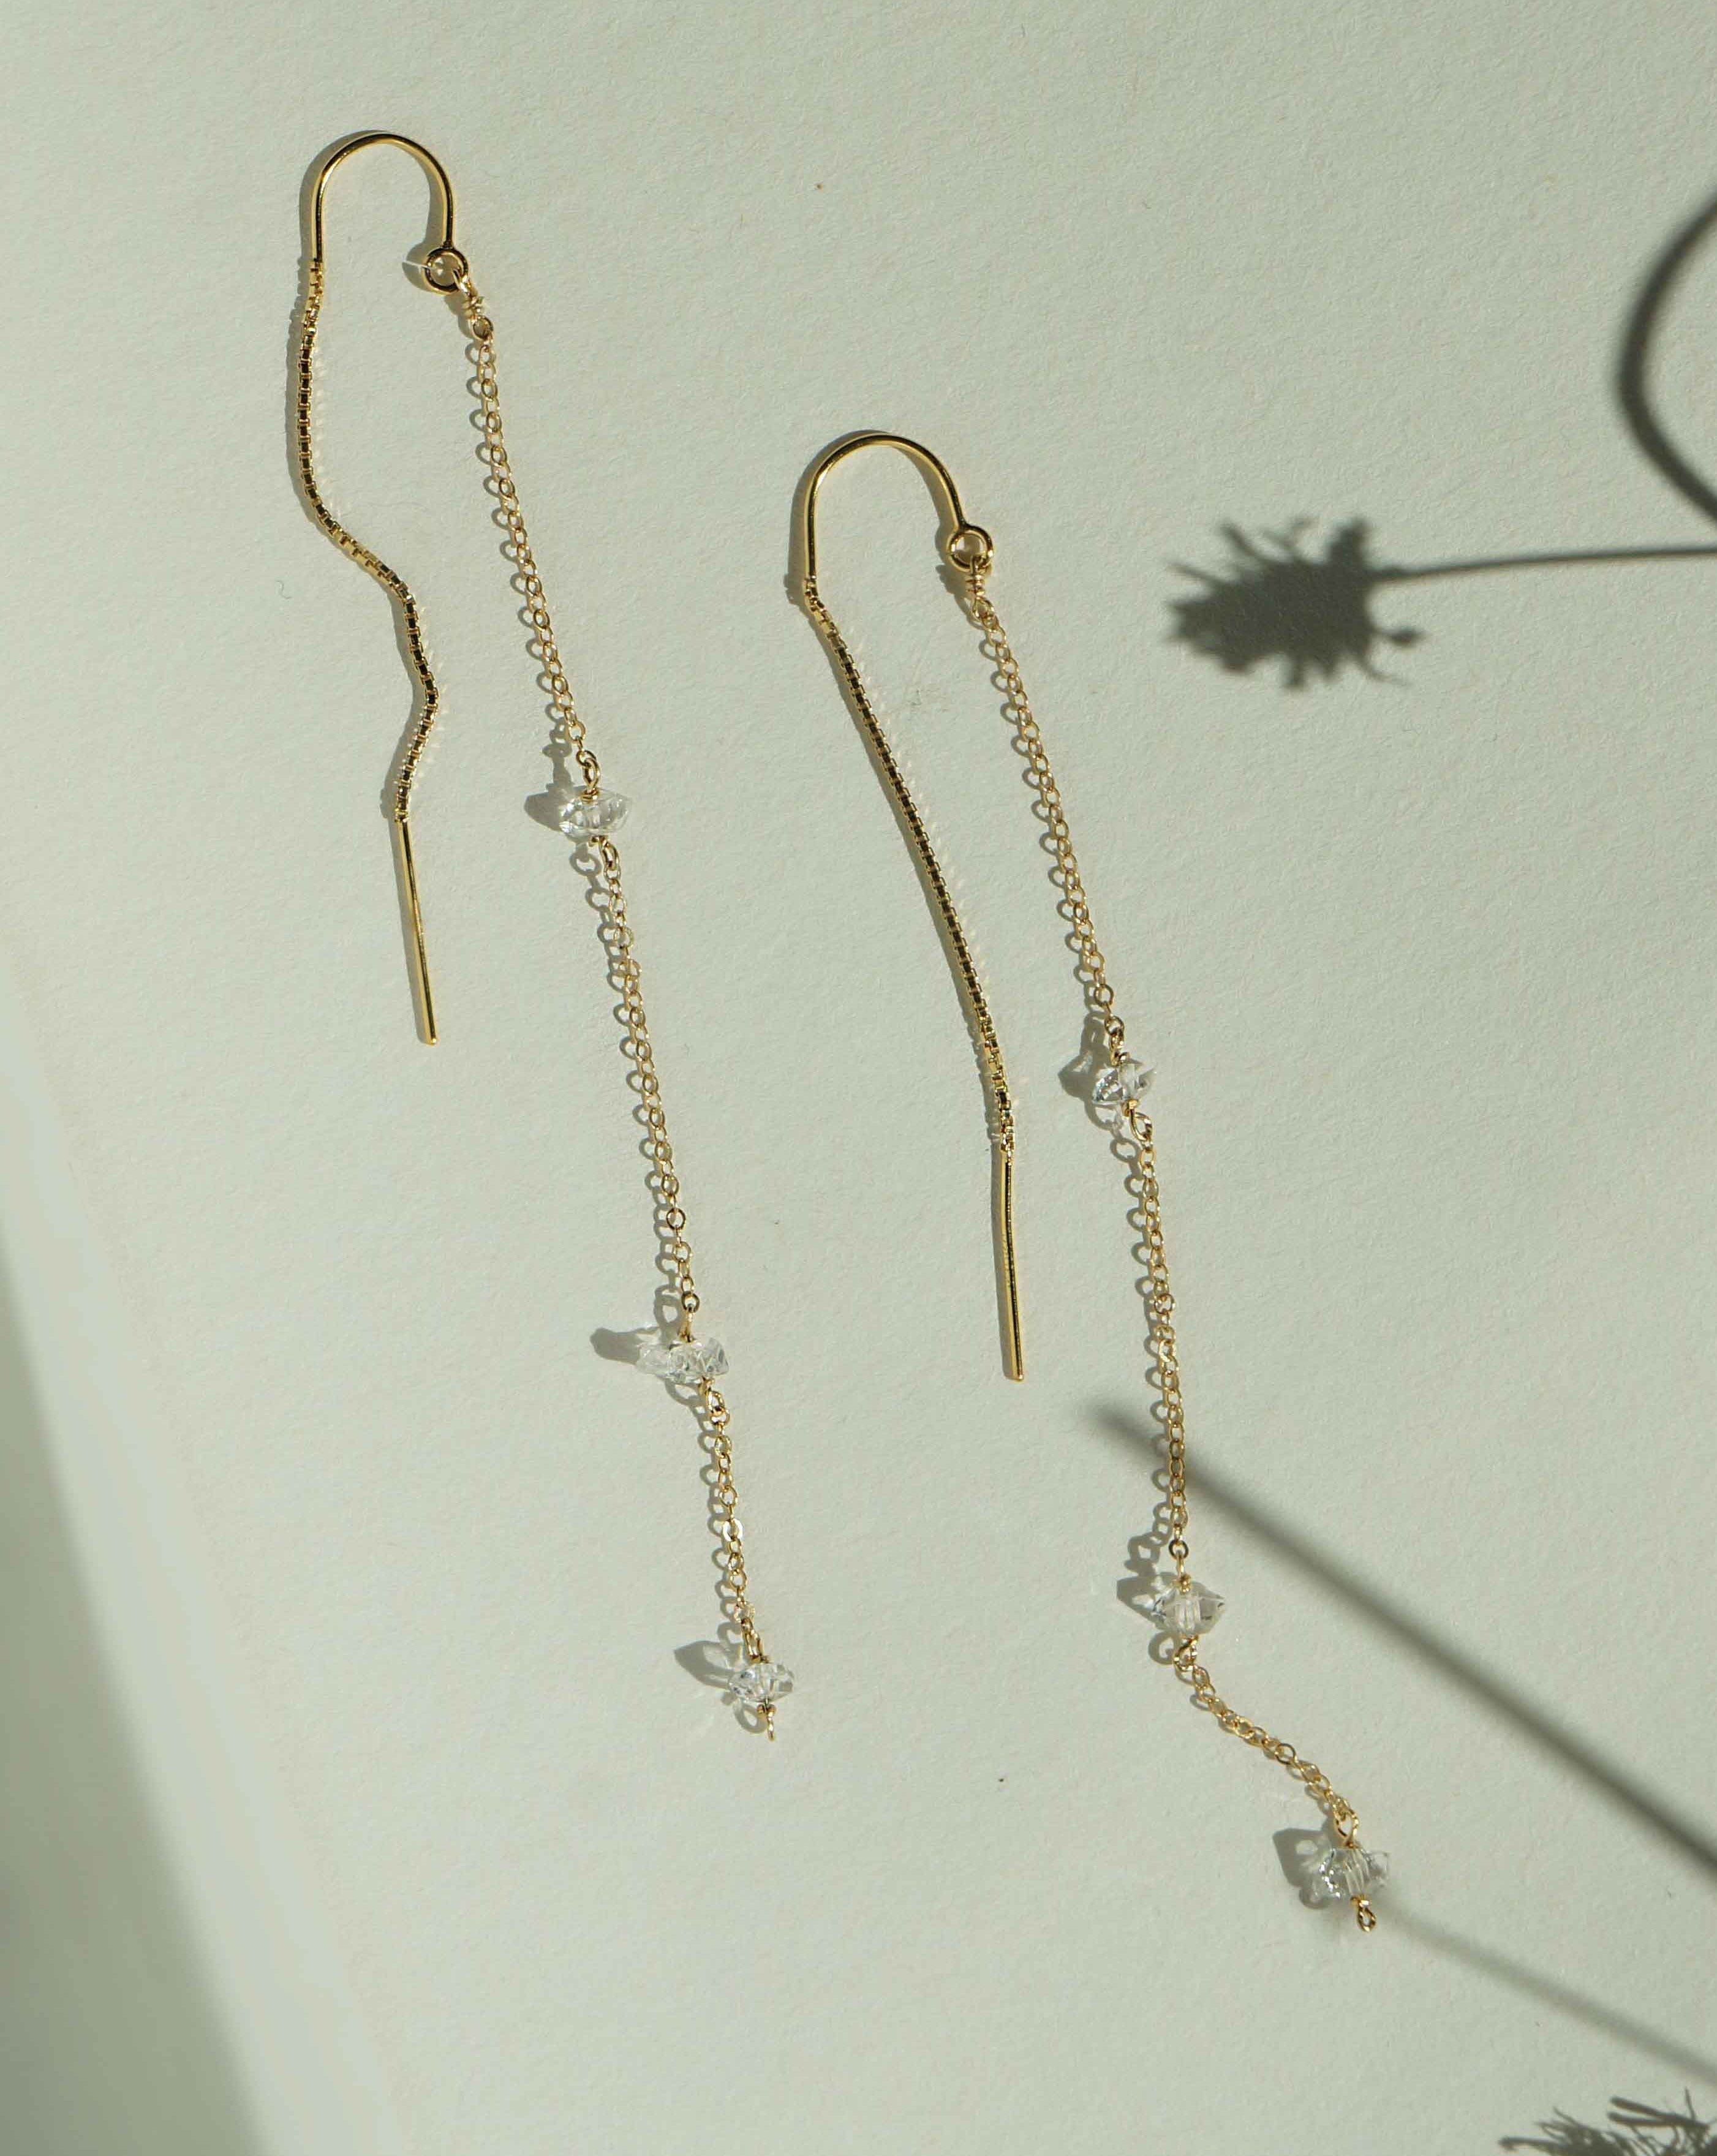 Chatoyant Threader Earrings by KOZAKH. 2 1/2 inch drop threader earrings in 14K Gold Filled, featuring Herkimer Diamonds.